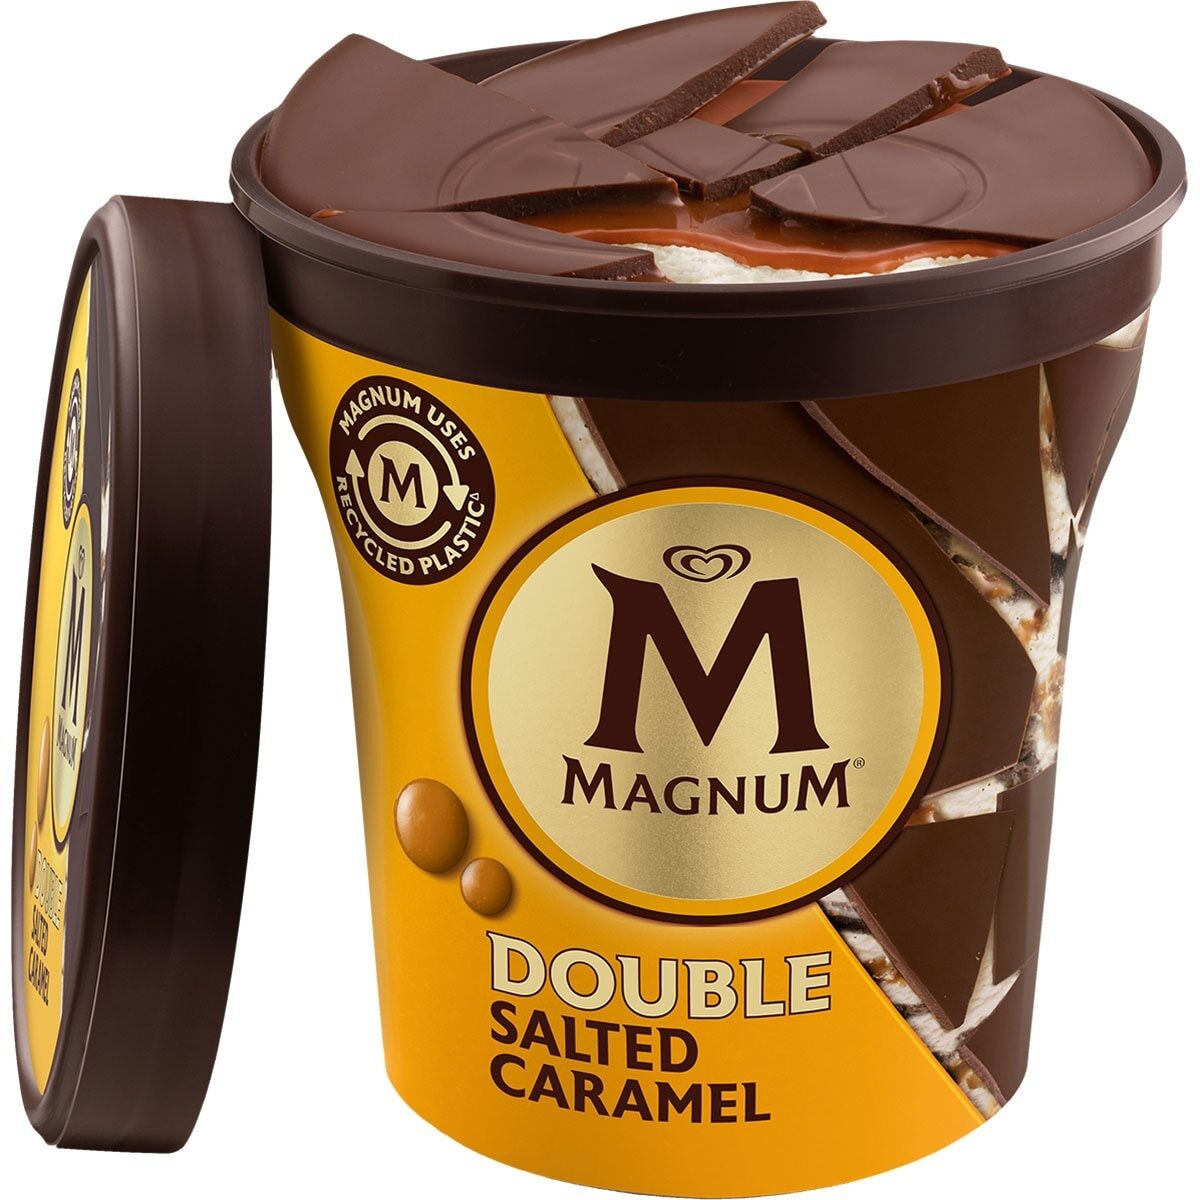 Magnum Double Salted Caramel - Product